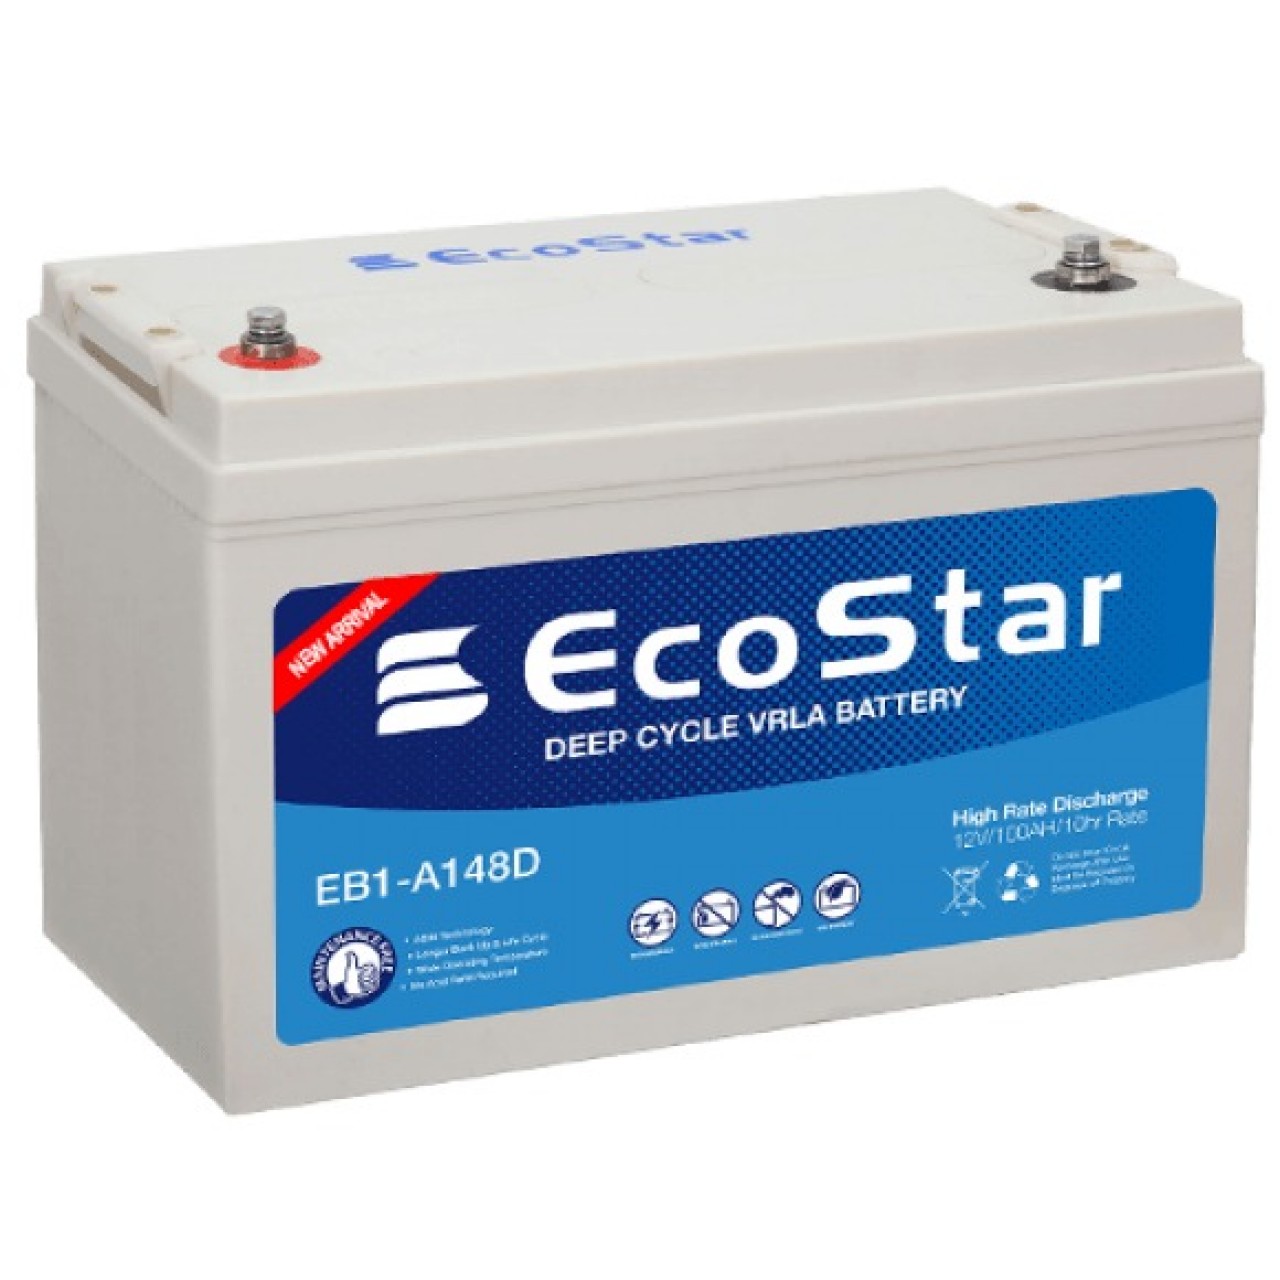 EcoStar Battery EB1-A148D – 100 Amp - Deep Cycle - Easy Installation